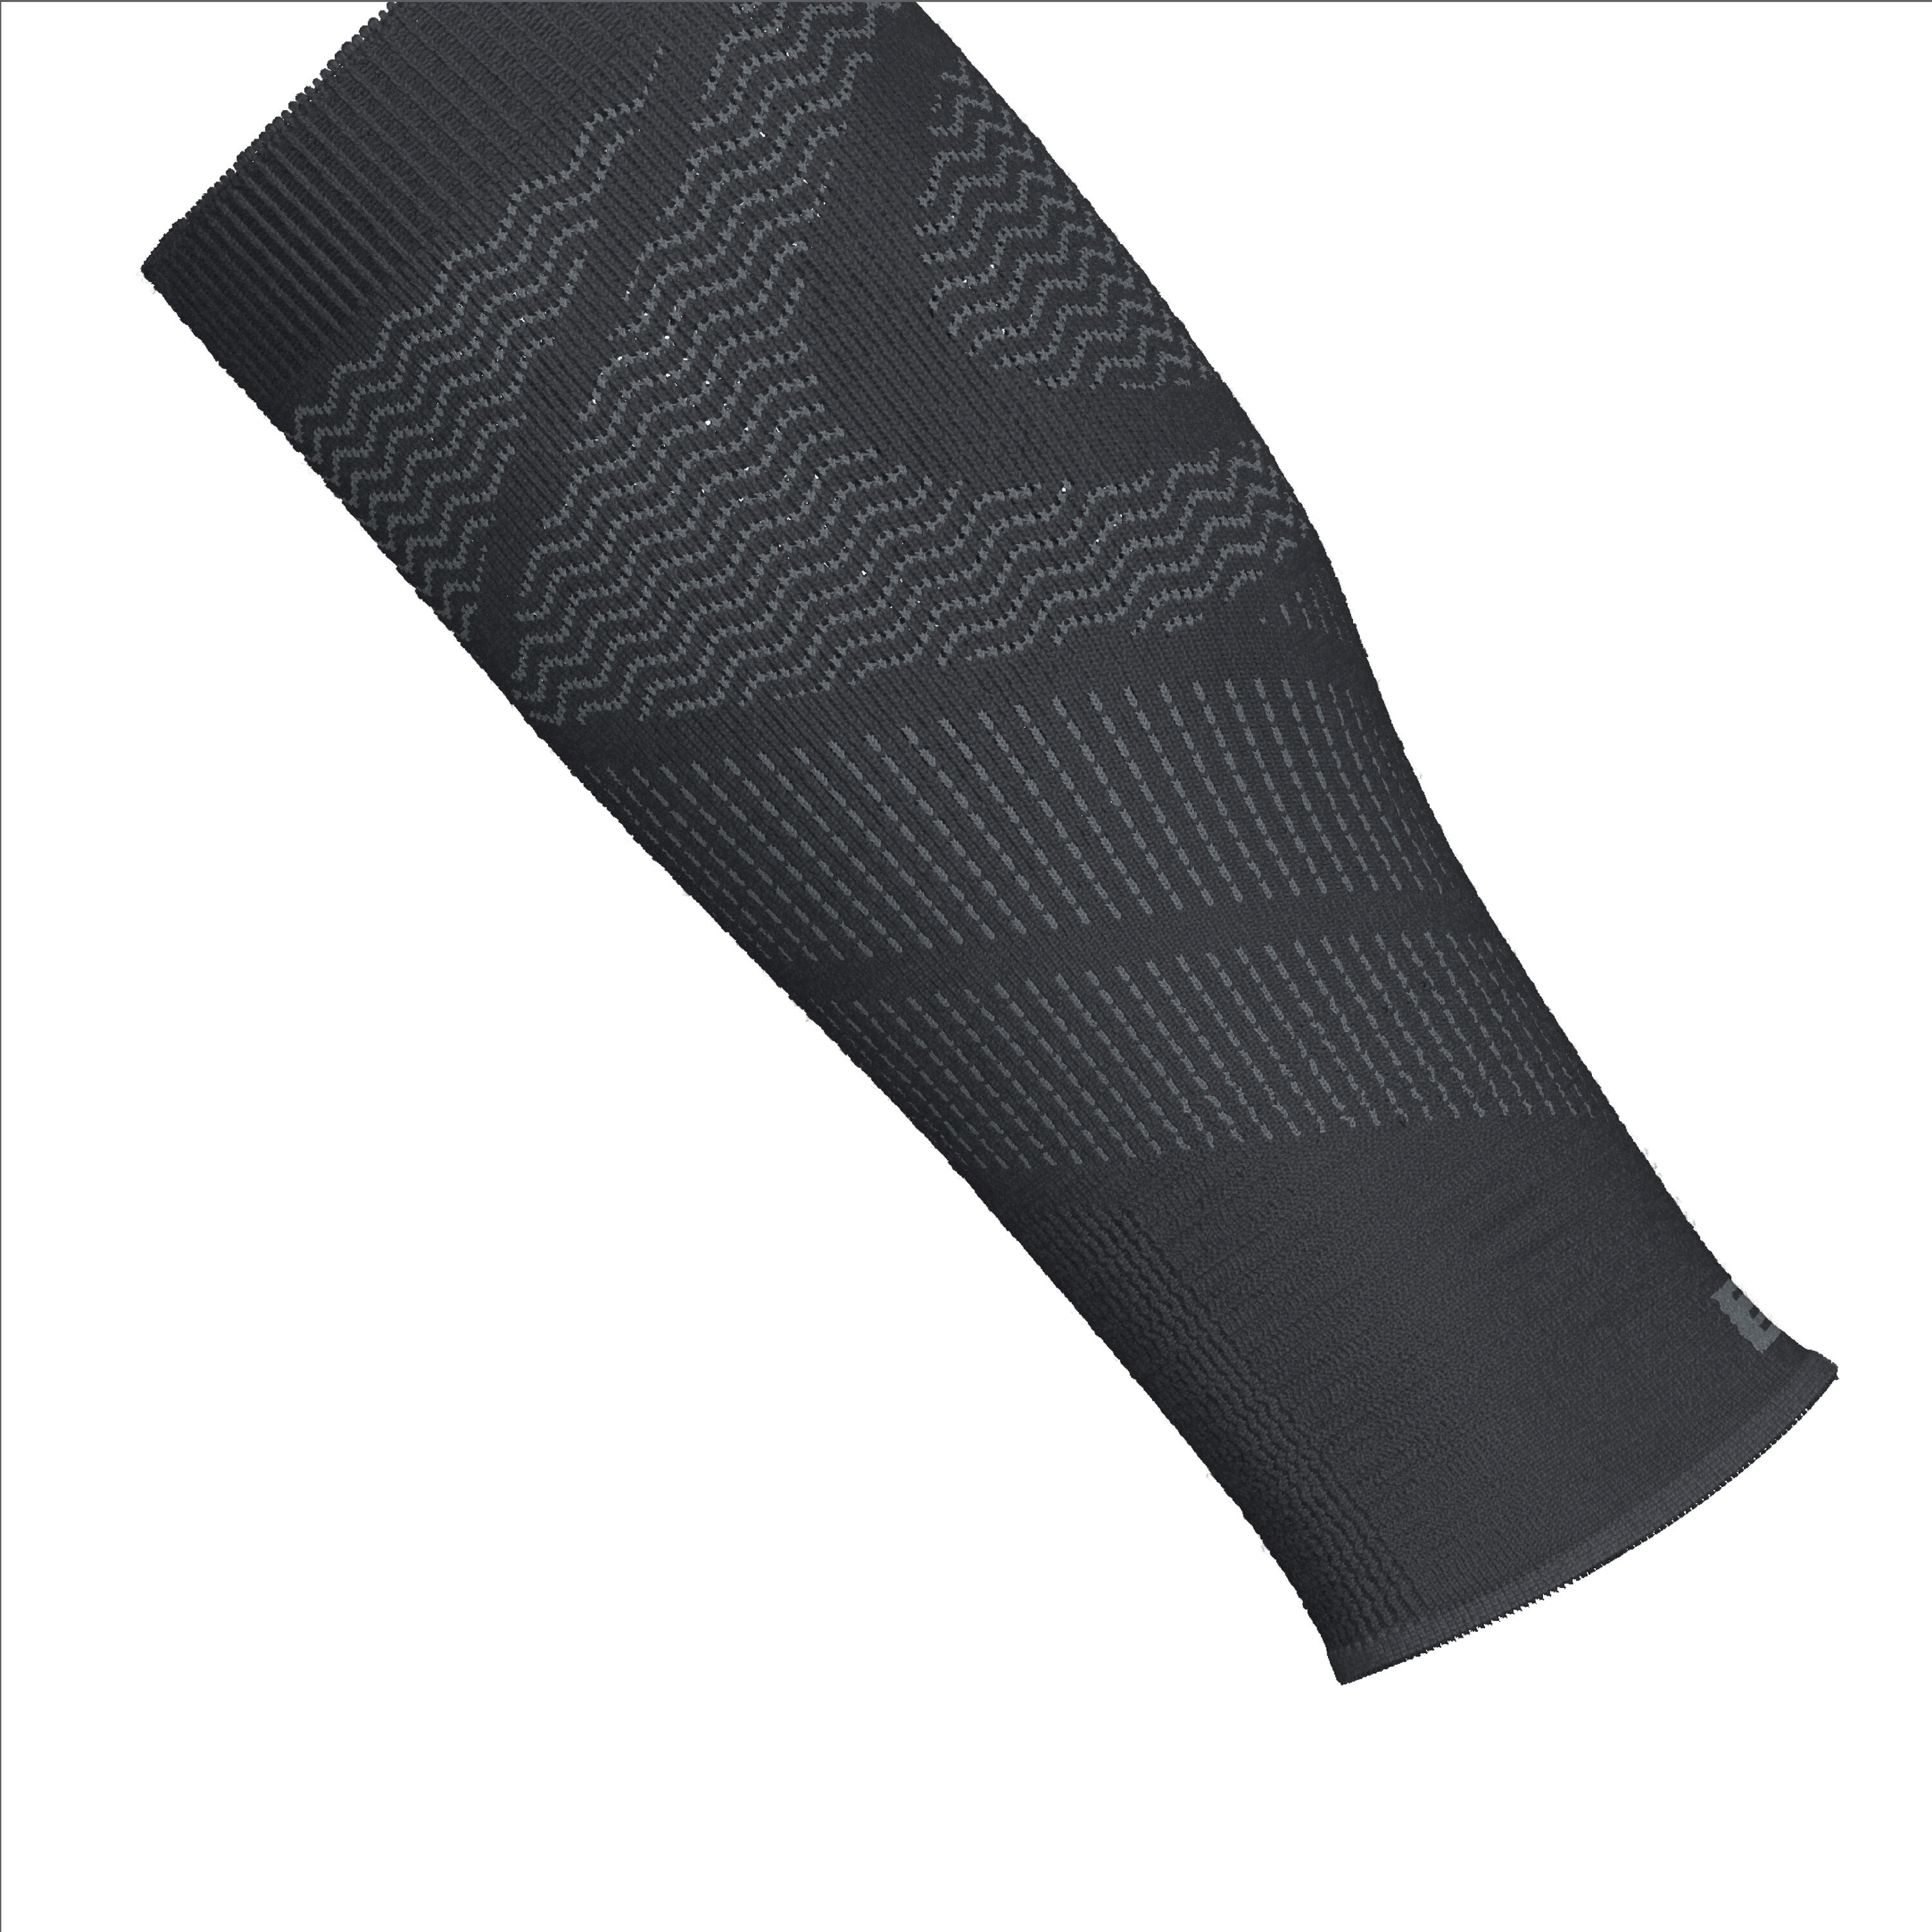 RUNNING 900 COMPRESSION SLEEVES 3/5